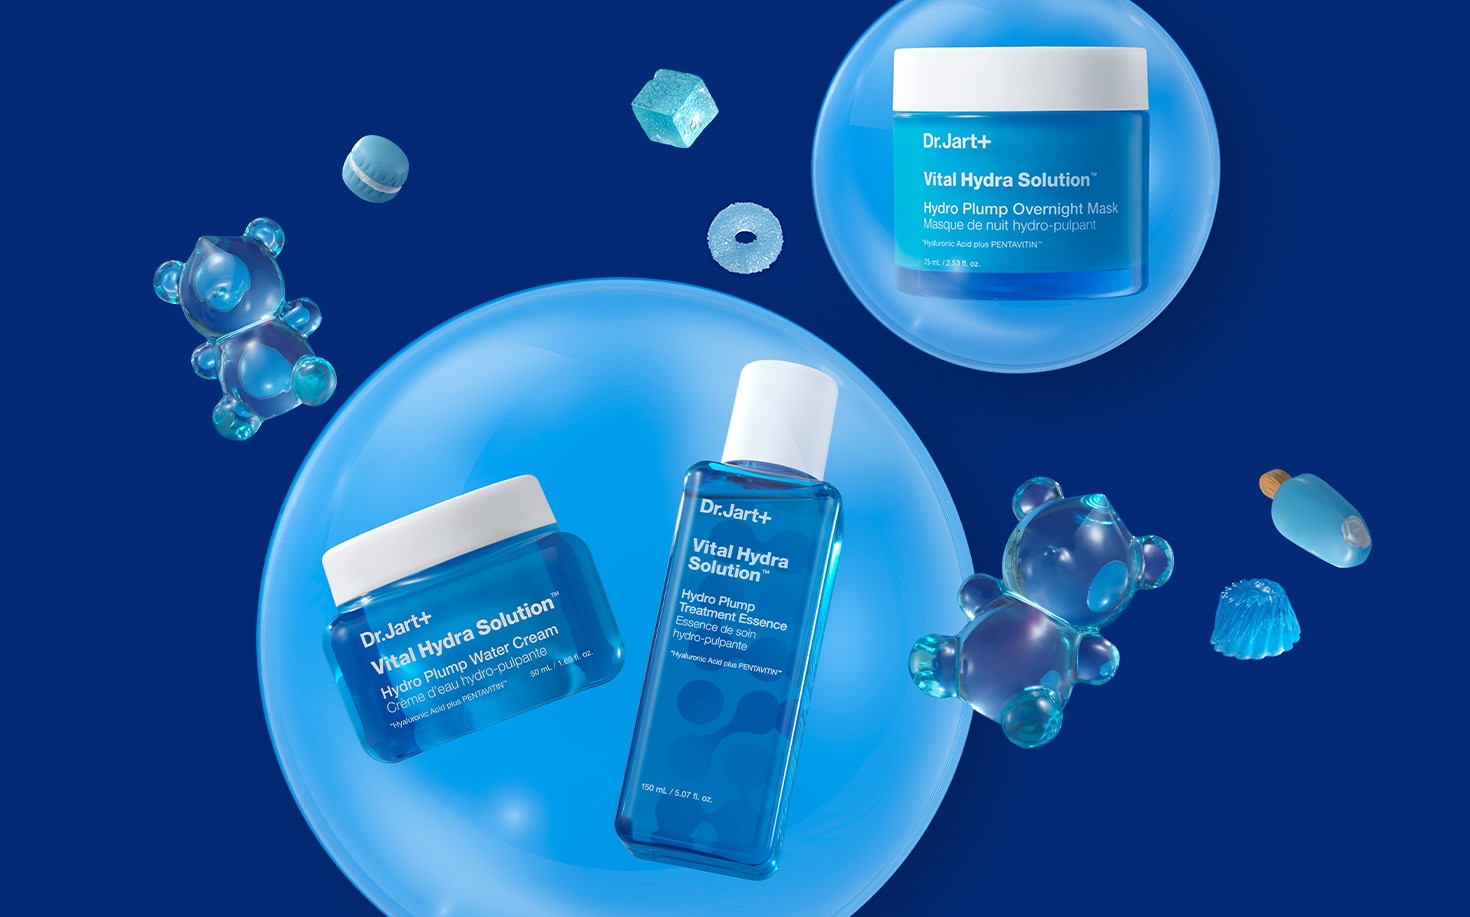 Vital Hydra Solution Collection of products for glowing skin floats among bubbles and blue jelly bears